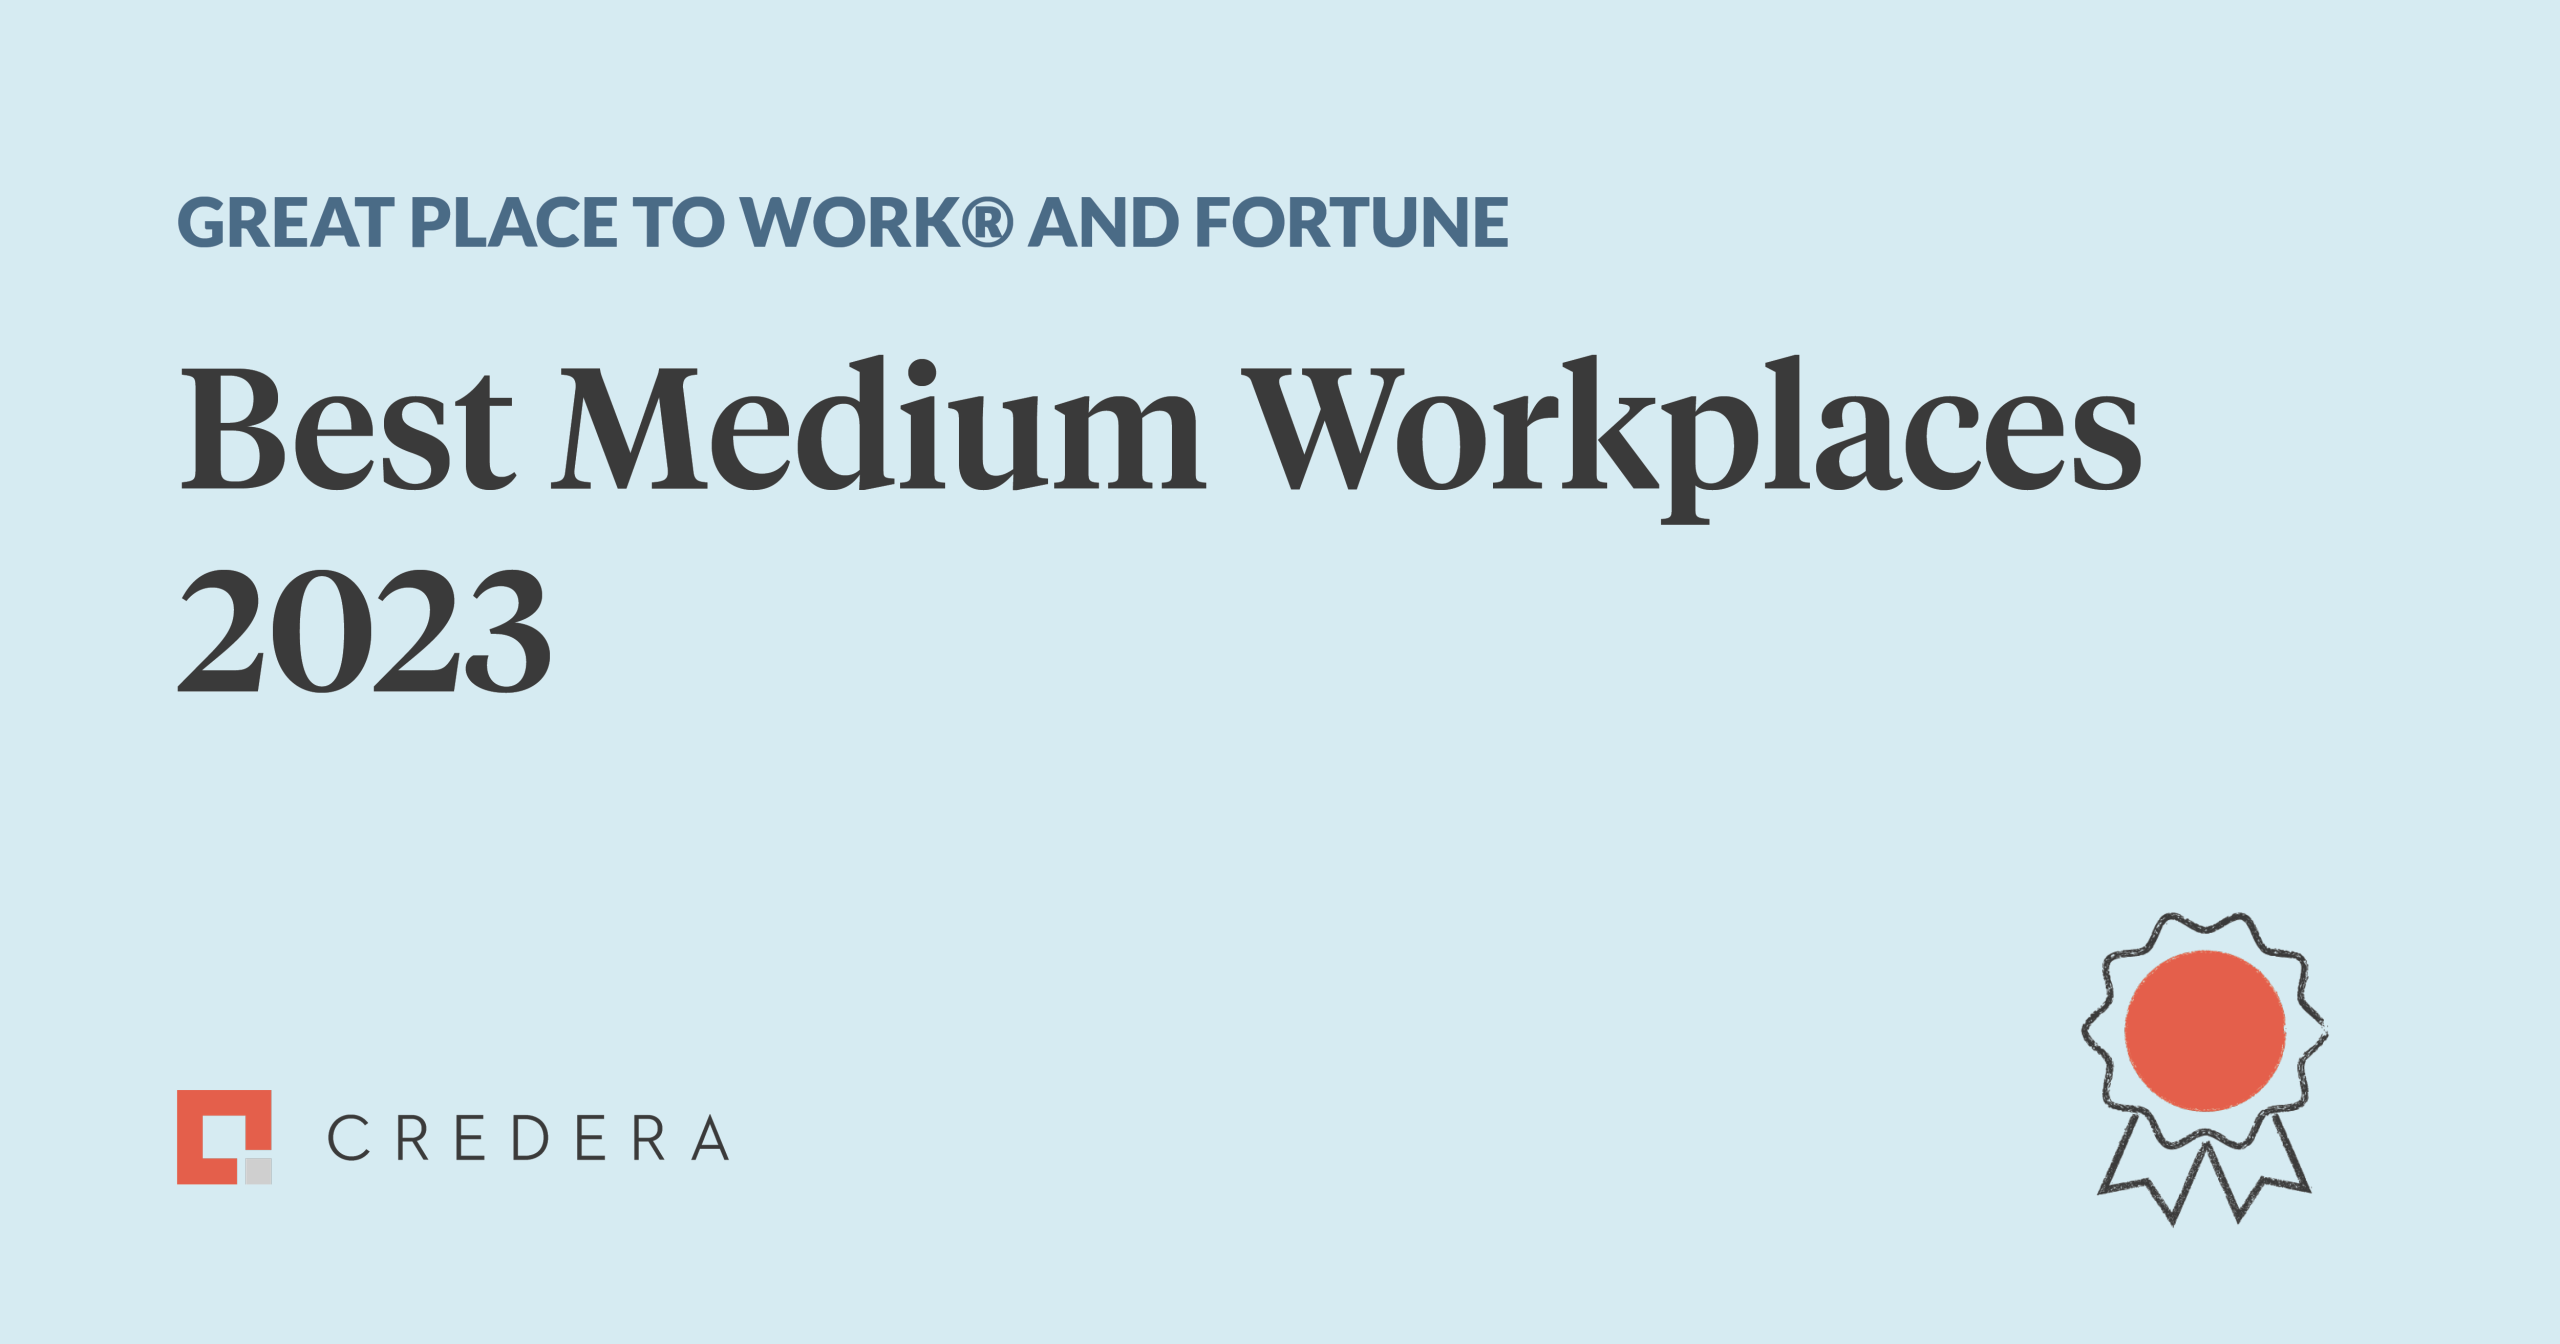 Credera named a Best Medium Workplace in the U.S. for the fifth year by Fortune